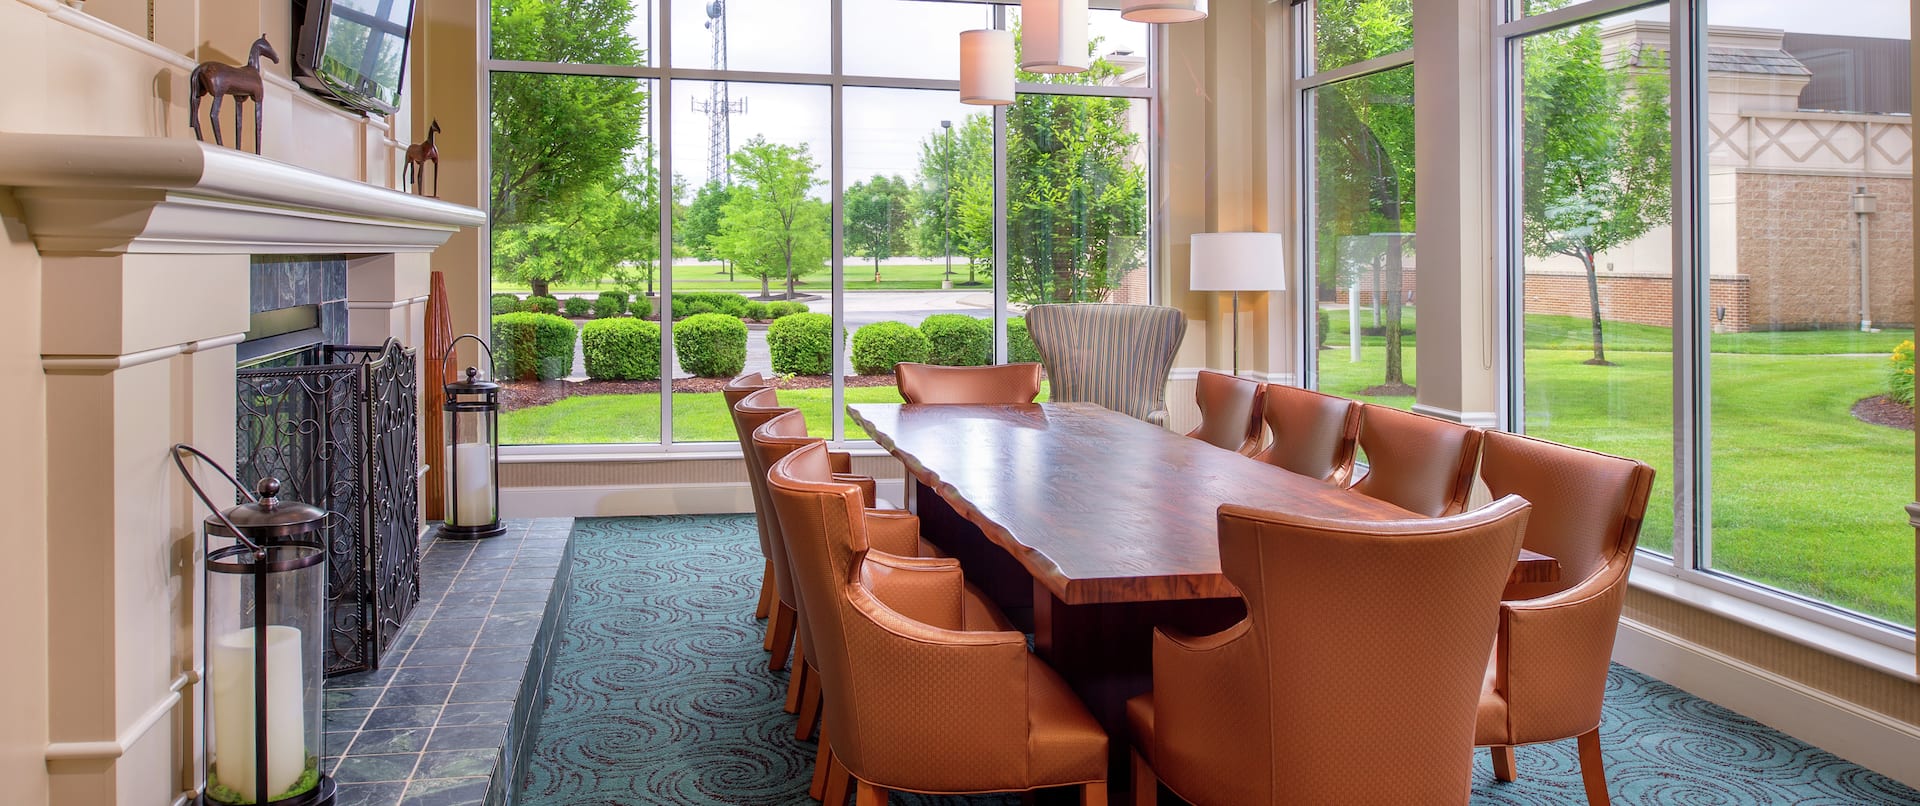 Seating for 10 at Table in Meeting Space 